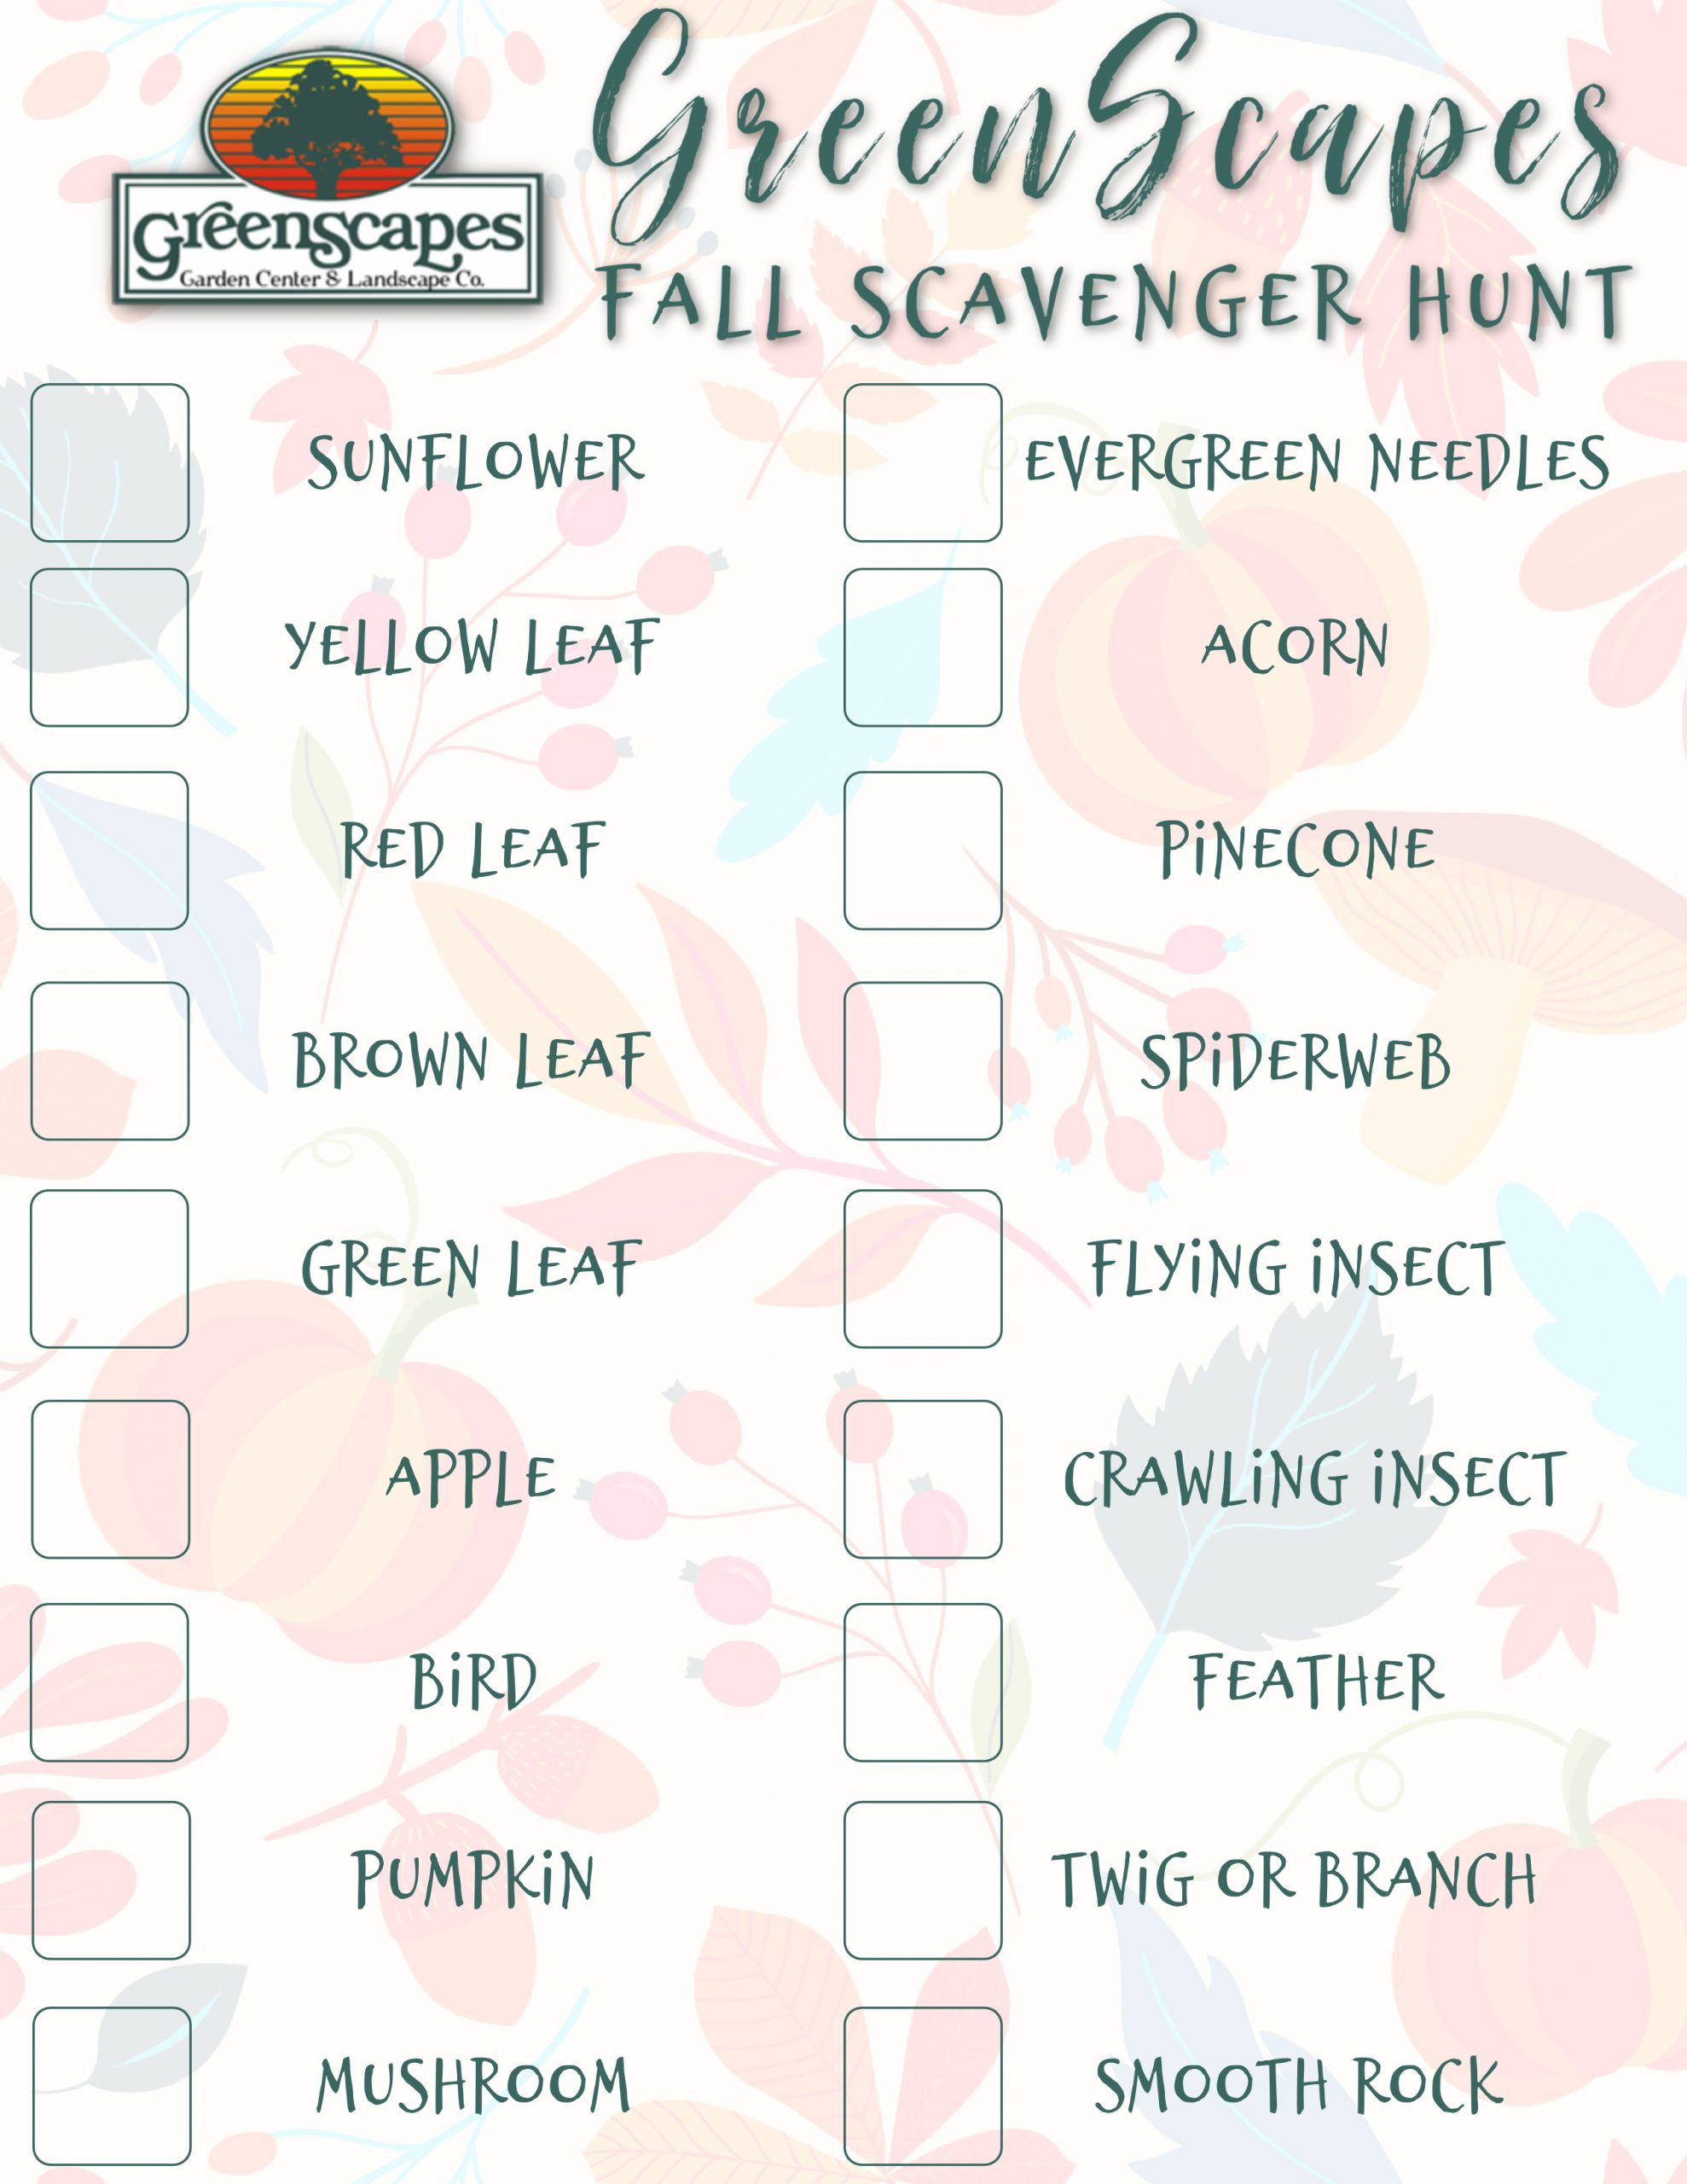 Download our Scavenger Hunt here!